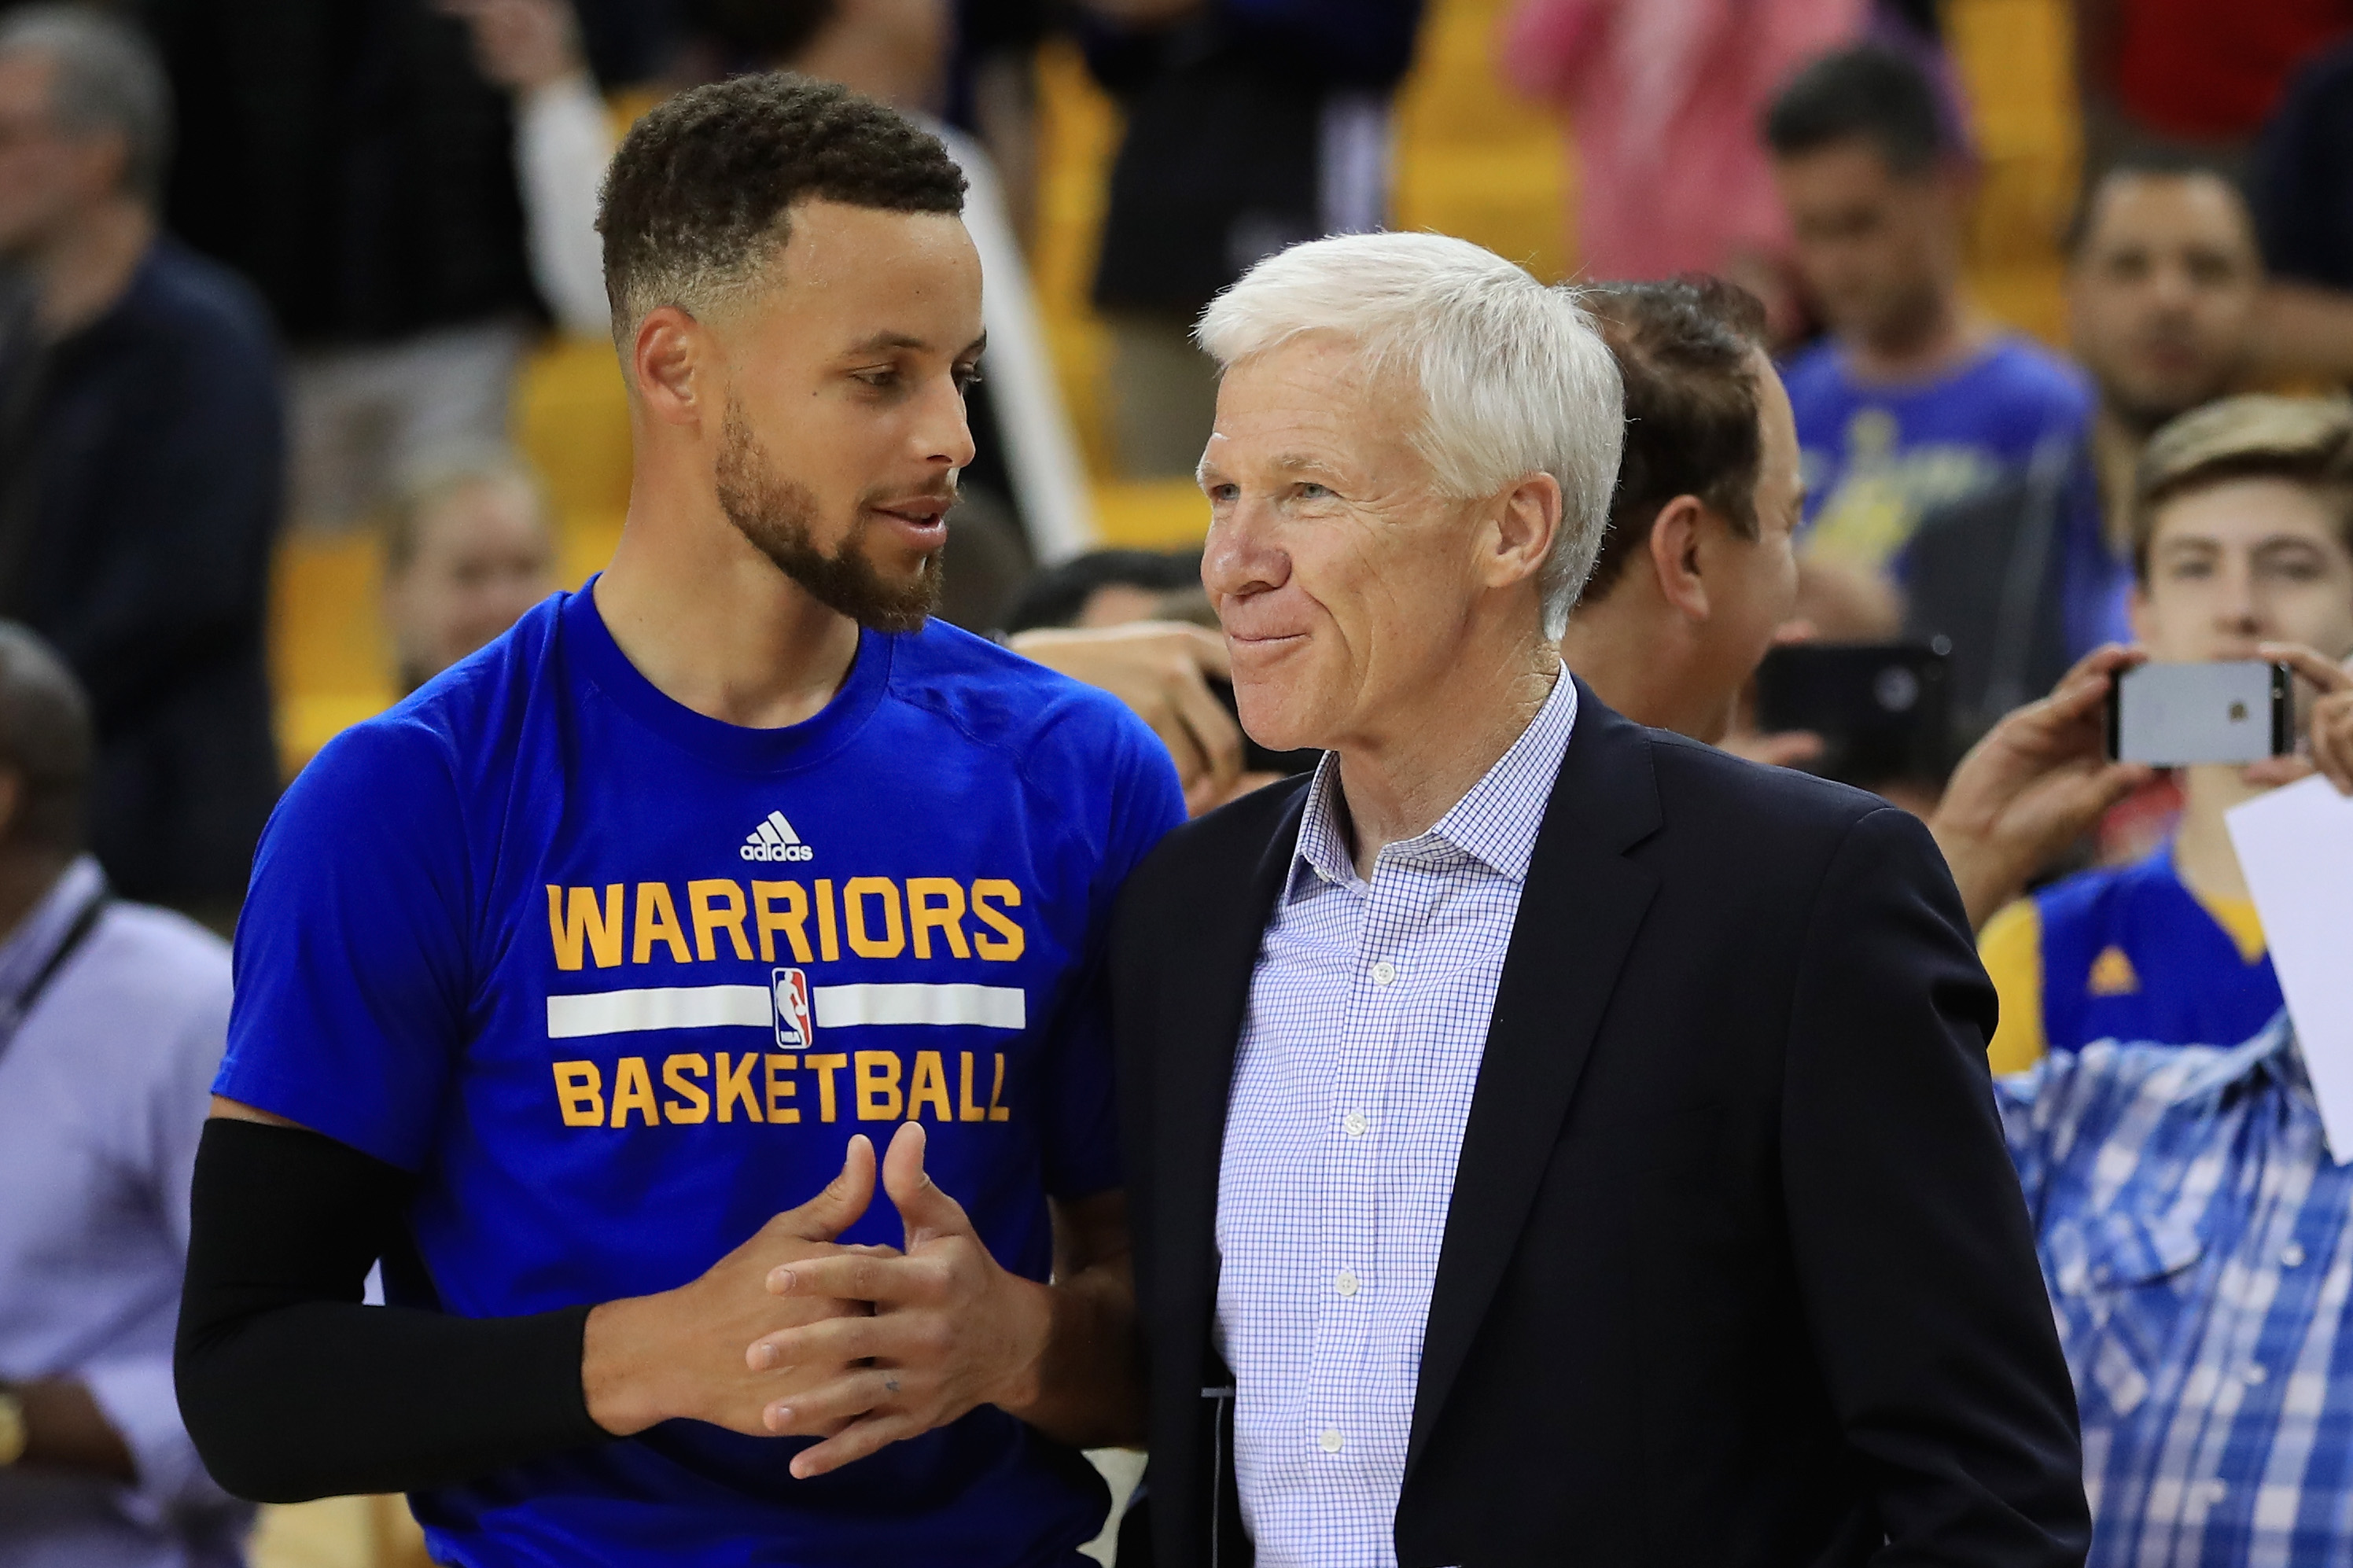 Stephen Curry of the Golden State Warriors speaks with Davidson head coach Bob McKillop prior to Game 1 of the 2017 NBA Finals.